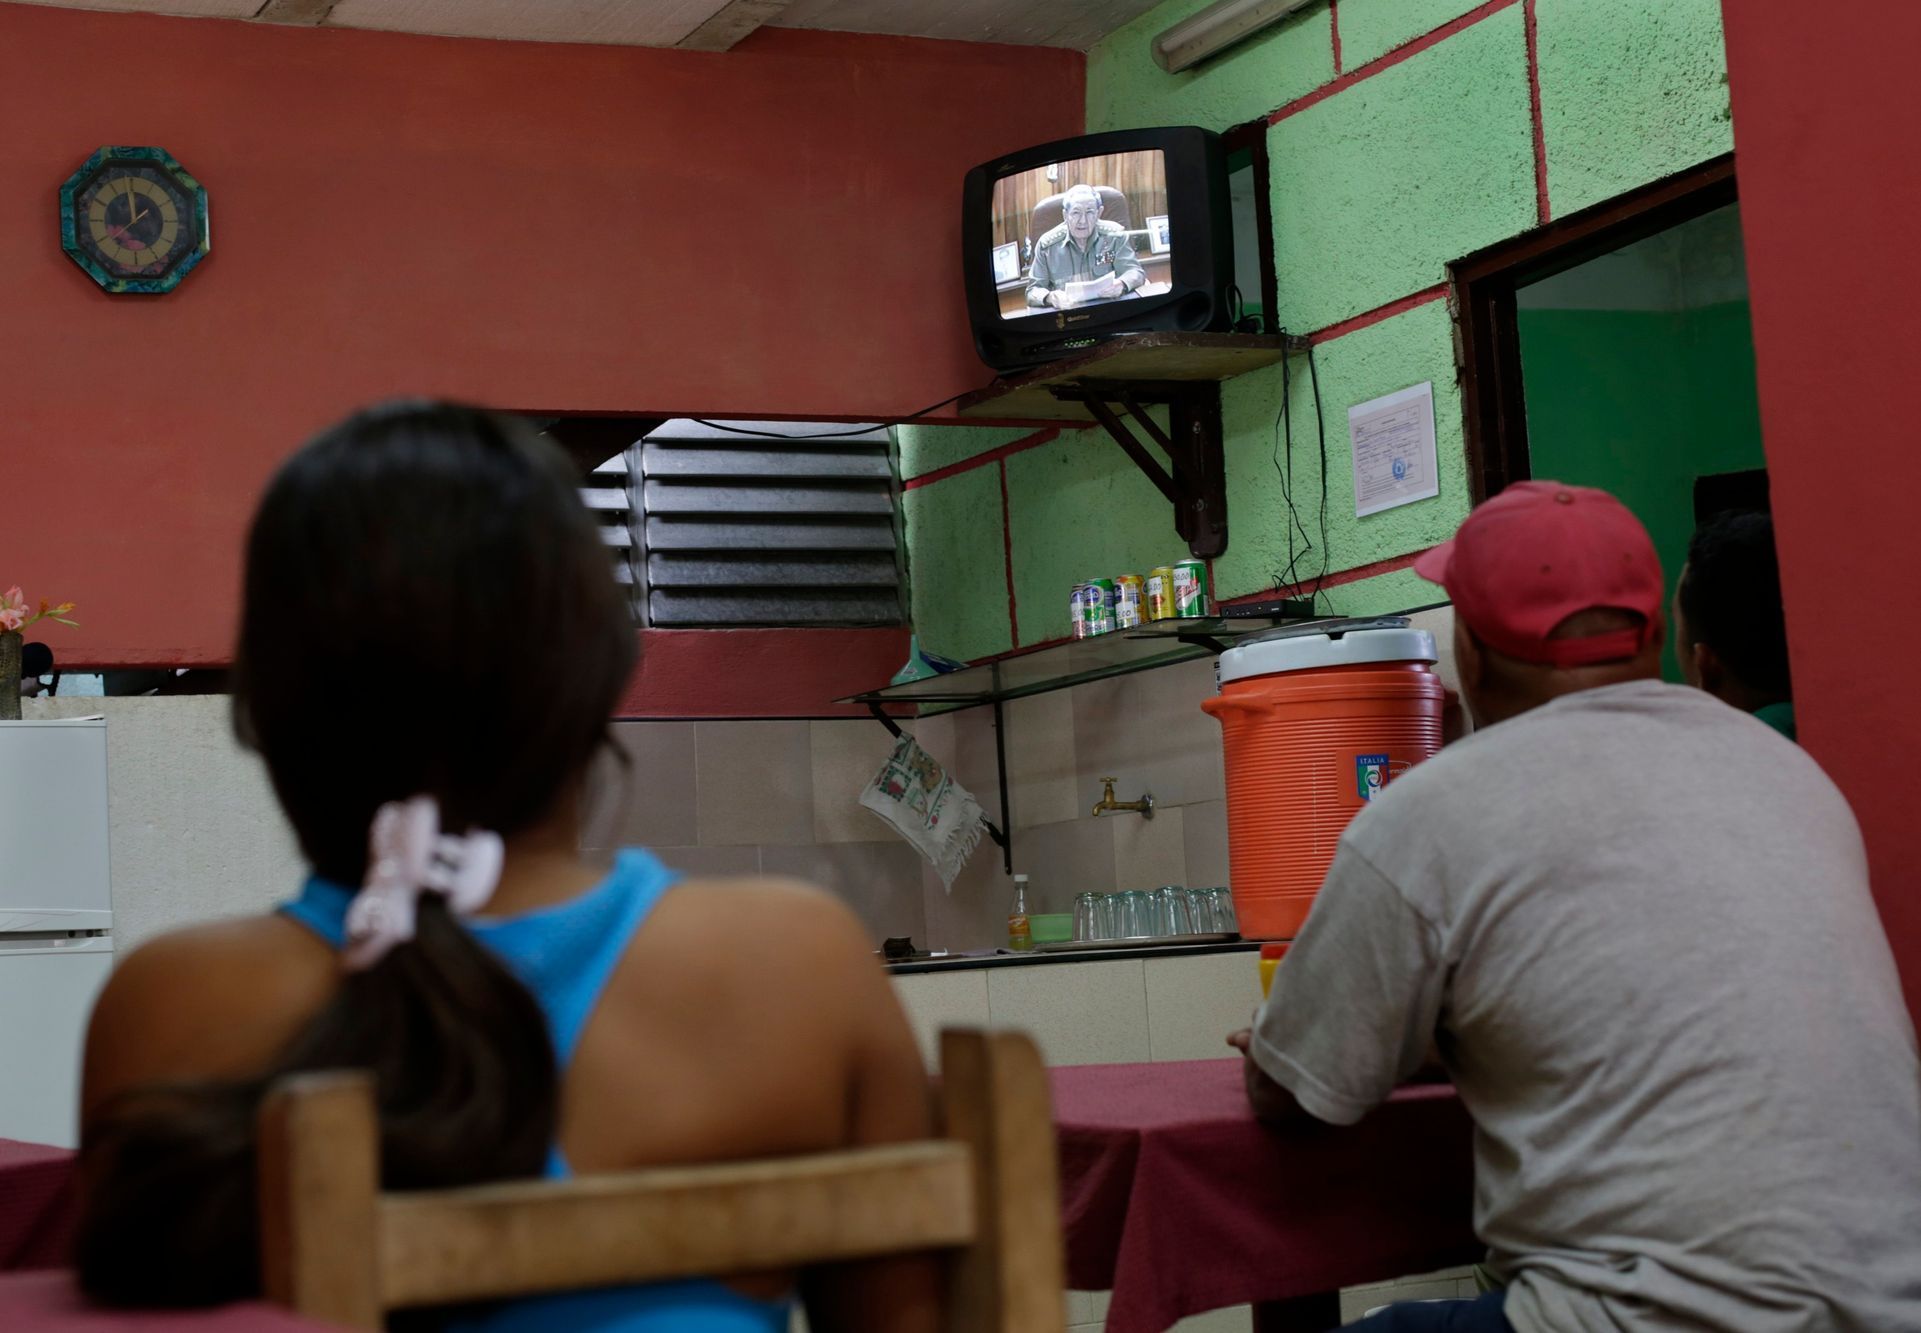 People watch television footage showing Cuba's president Castro speaking during a state television broadcast in a private restaurant in Havana